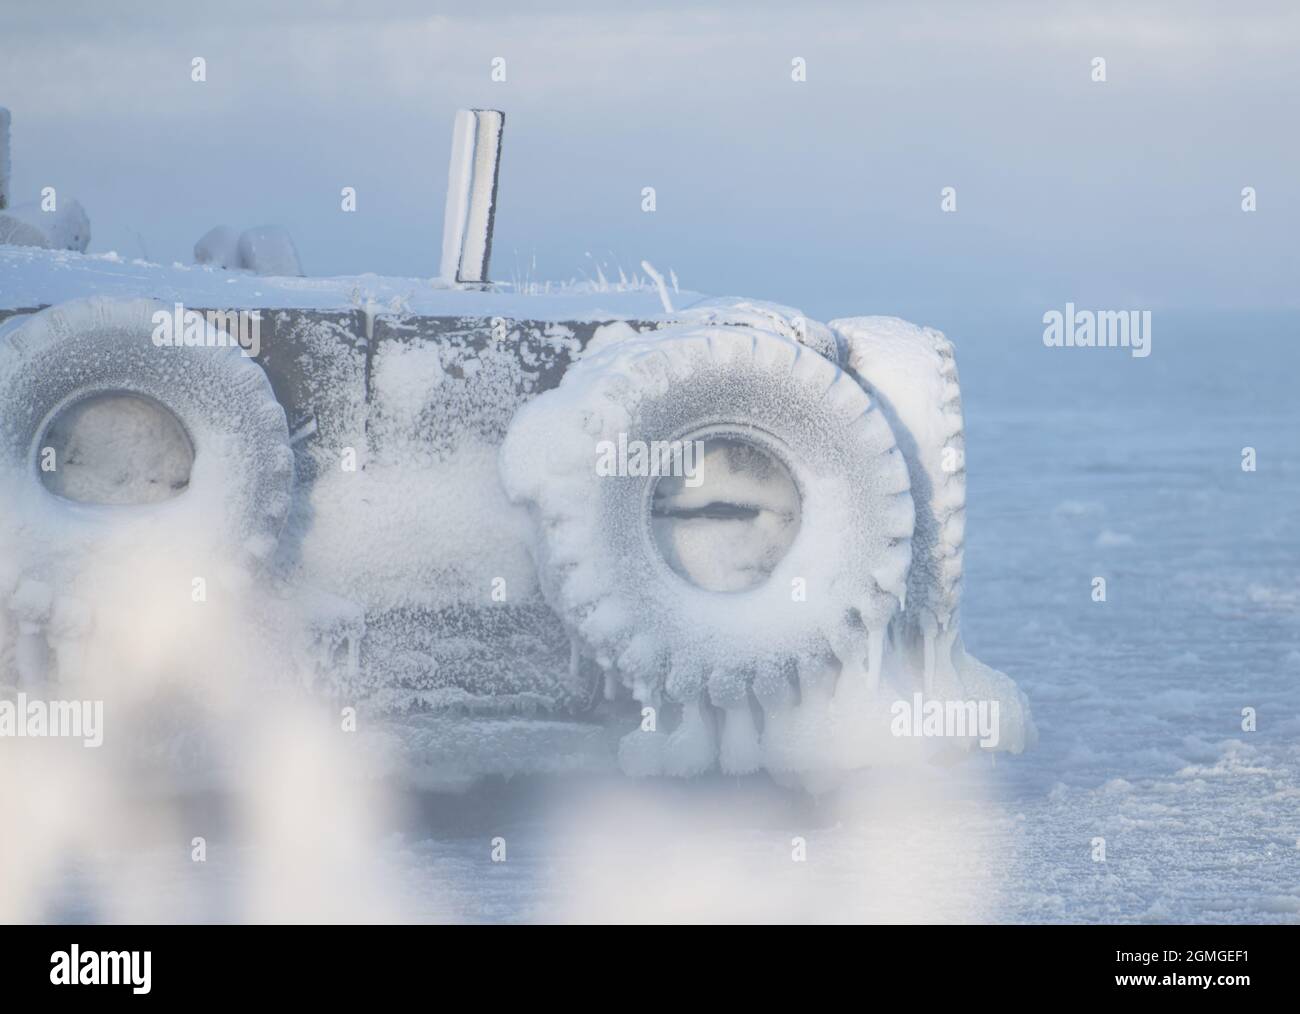 Ice covered boat docks with tractor wheels by the Baltic sea in Helsinki, Finland. Stock Photo